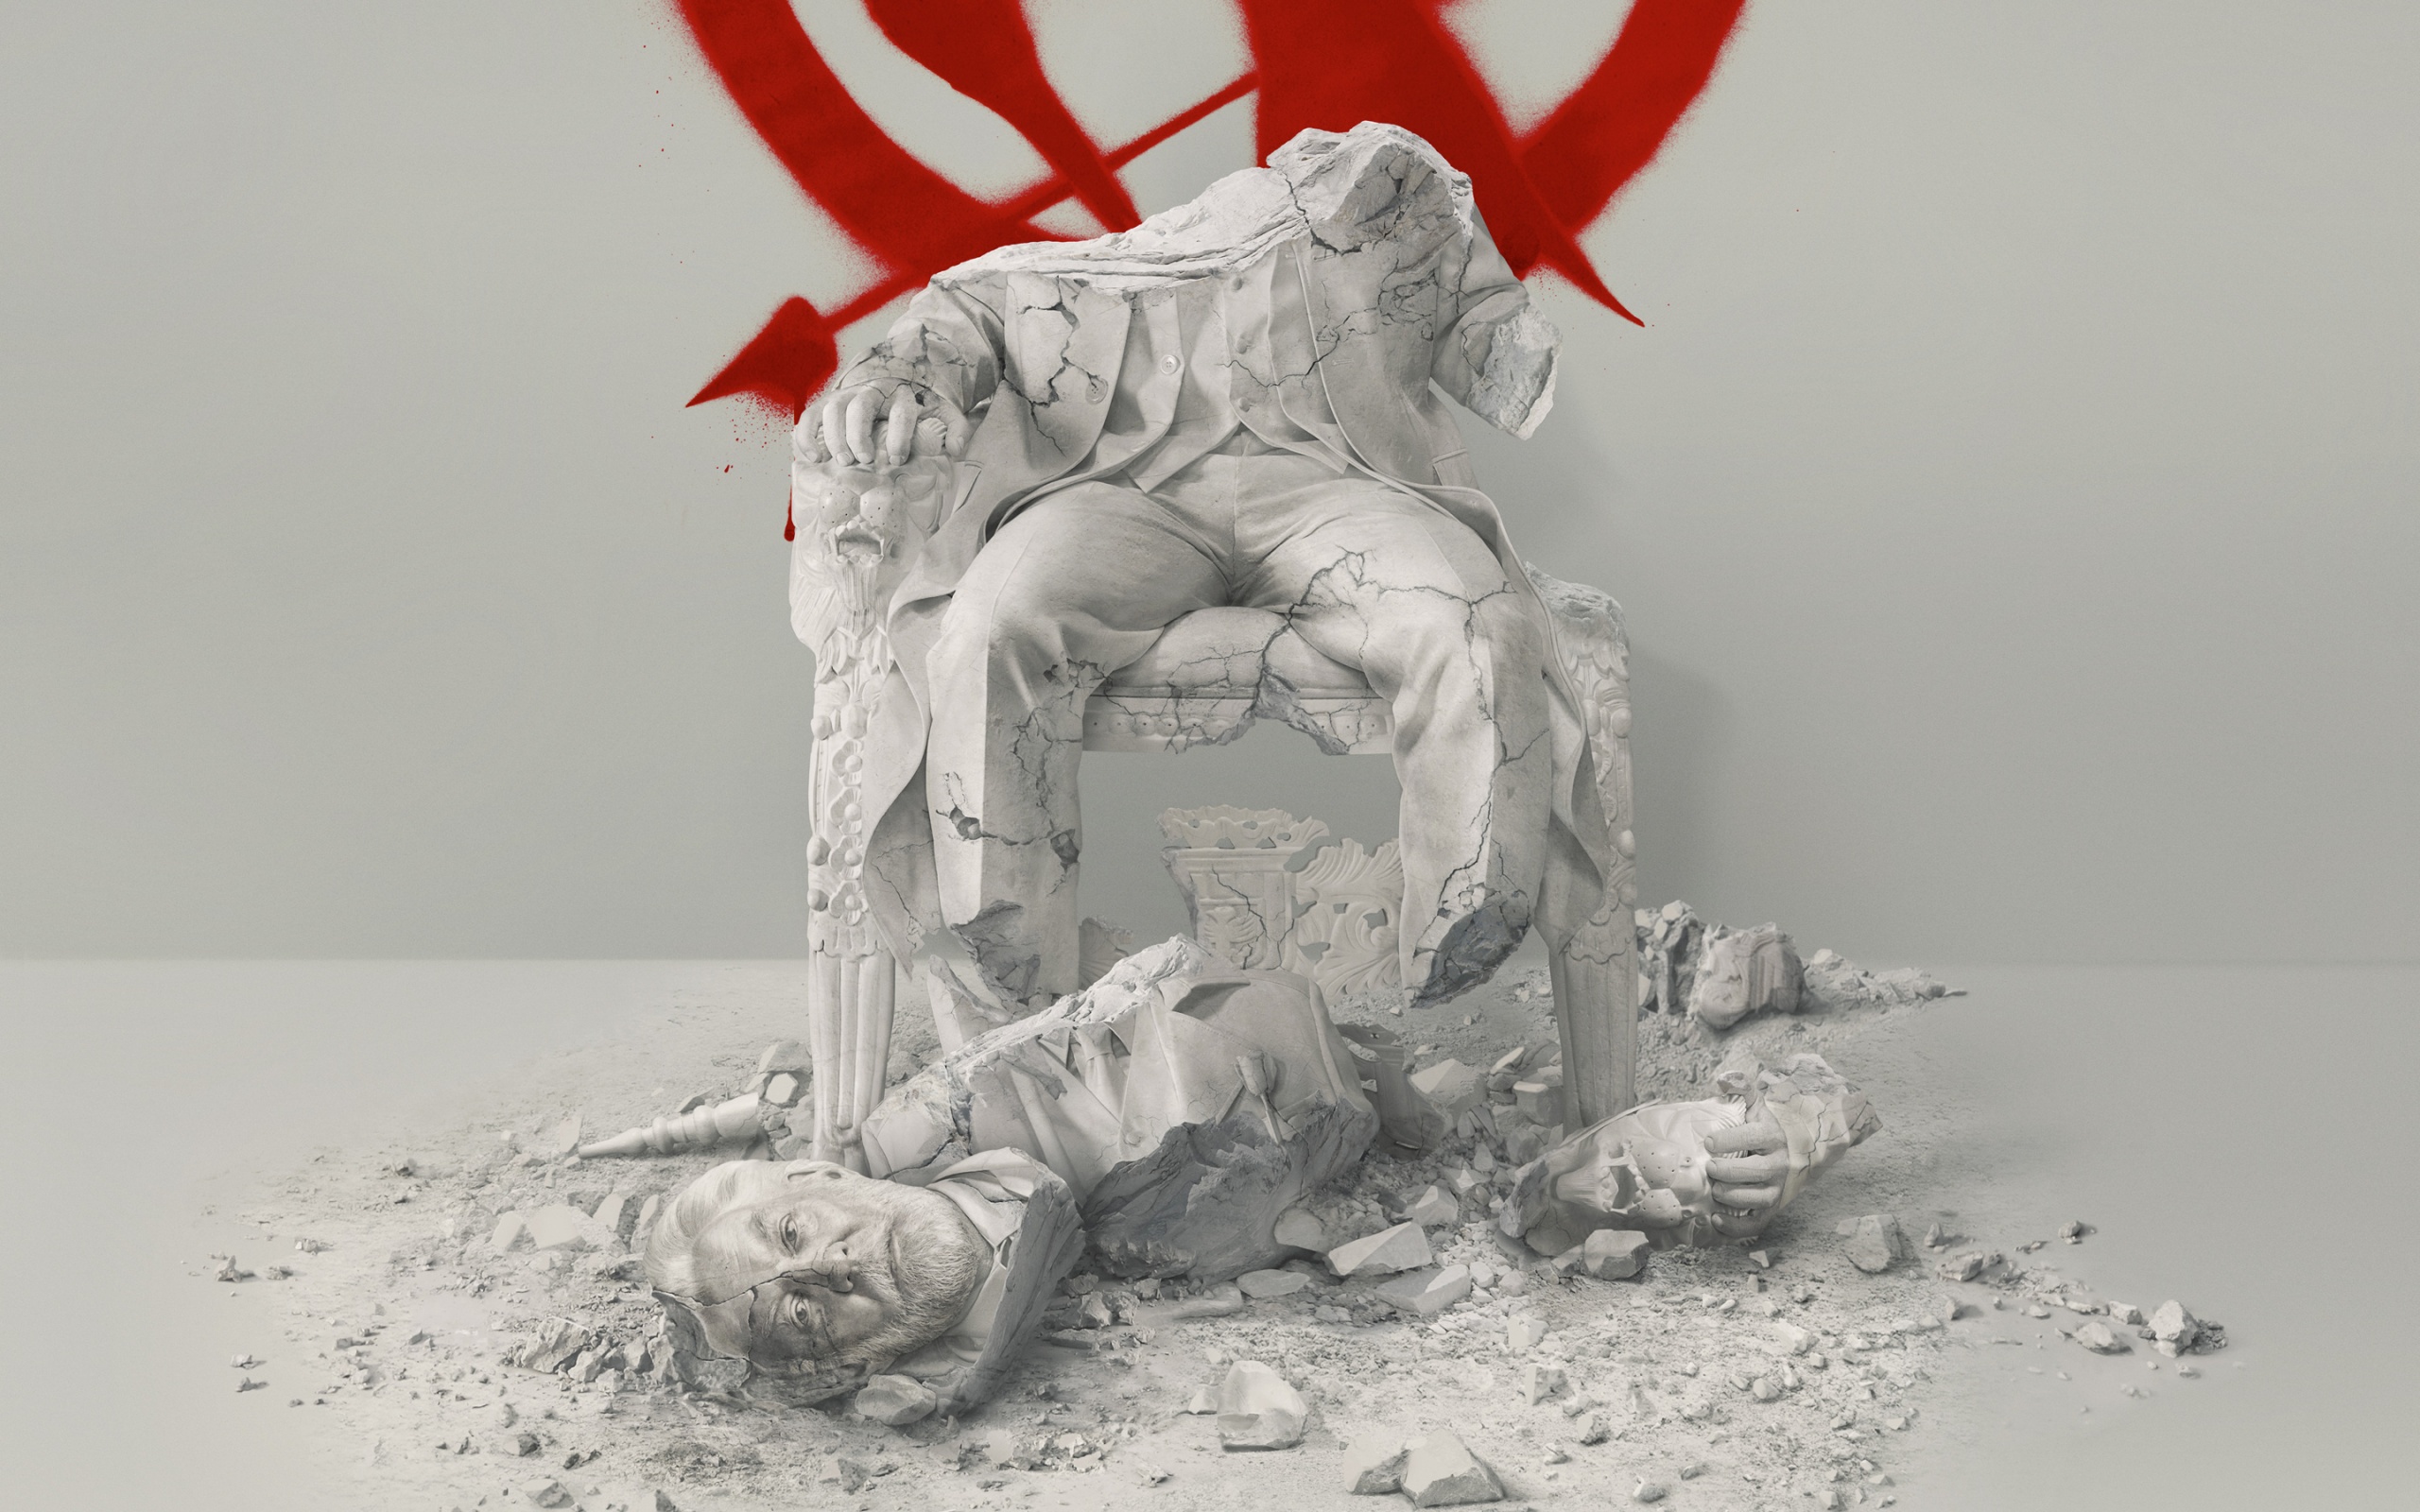 Hunger Games Mockingjay Part Wallpapers HD Wallpapers